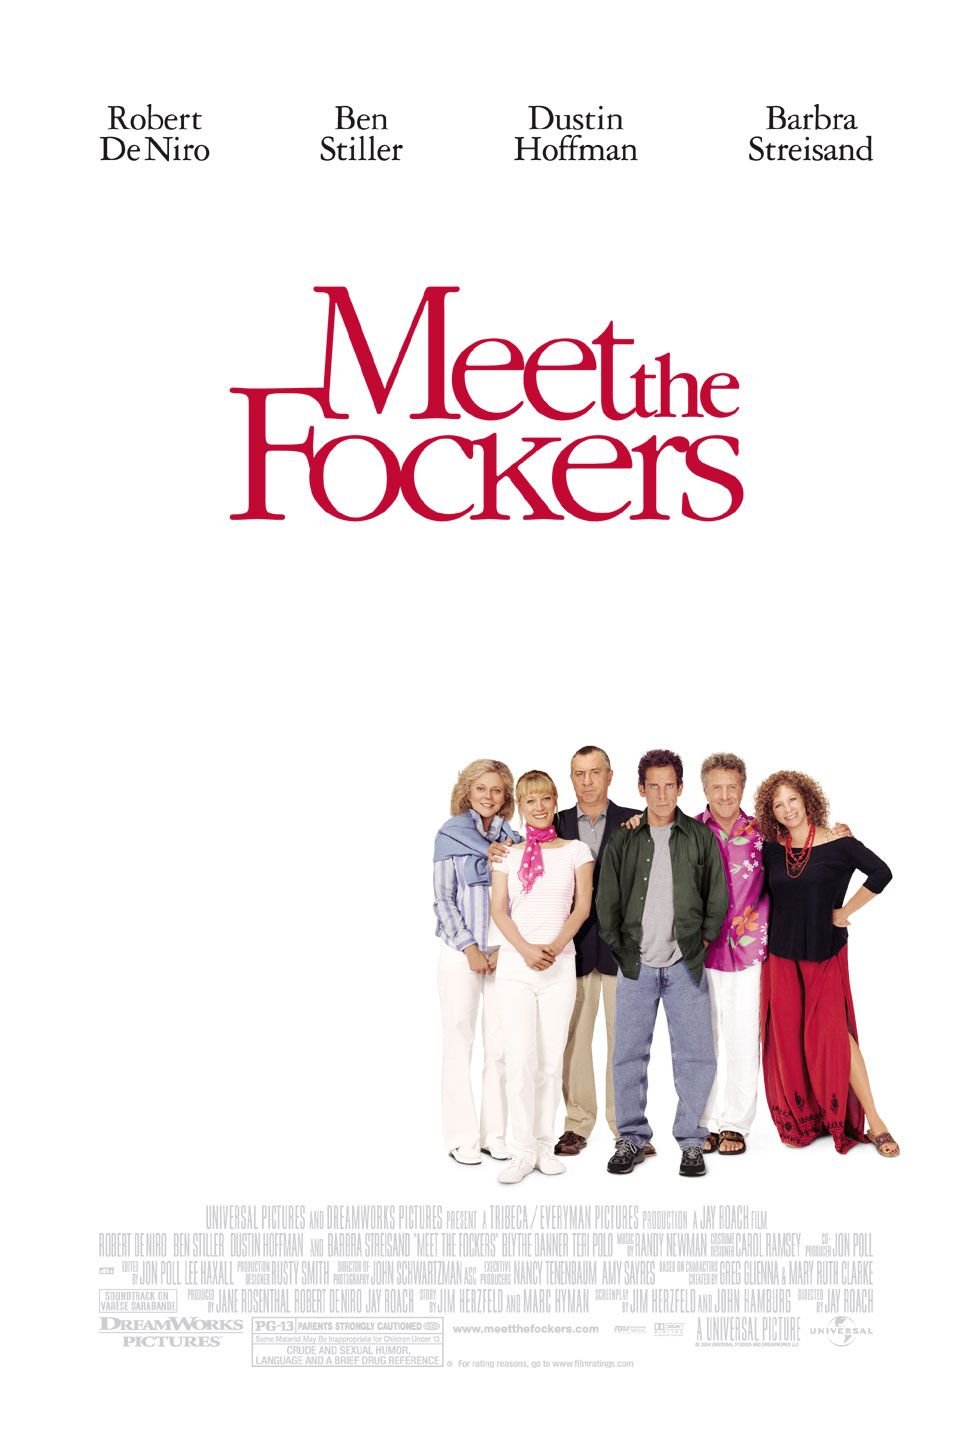 Poster of the movie Meet the Fockers